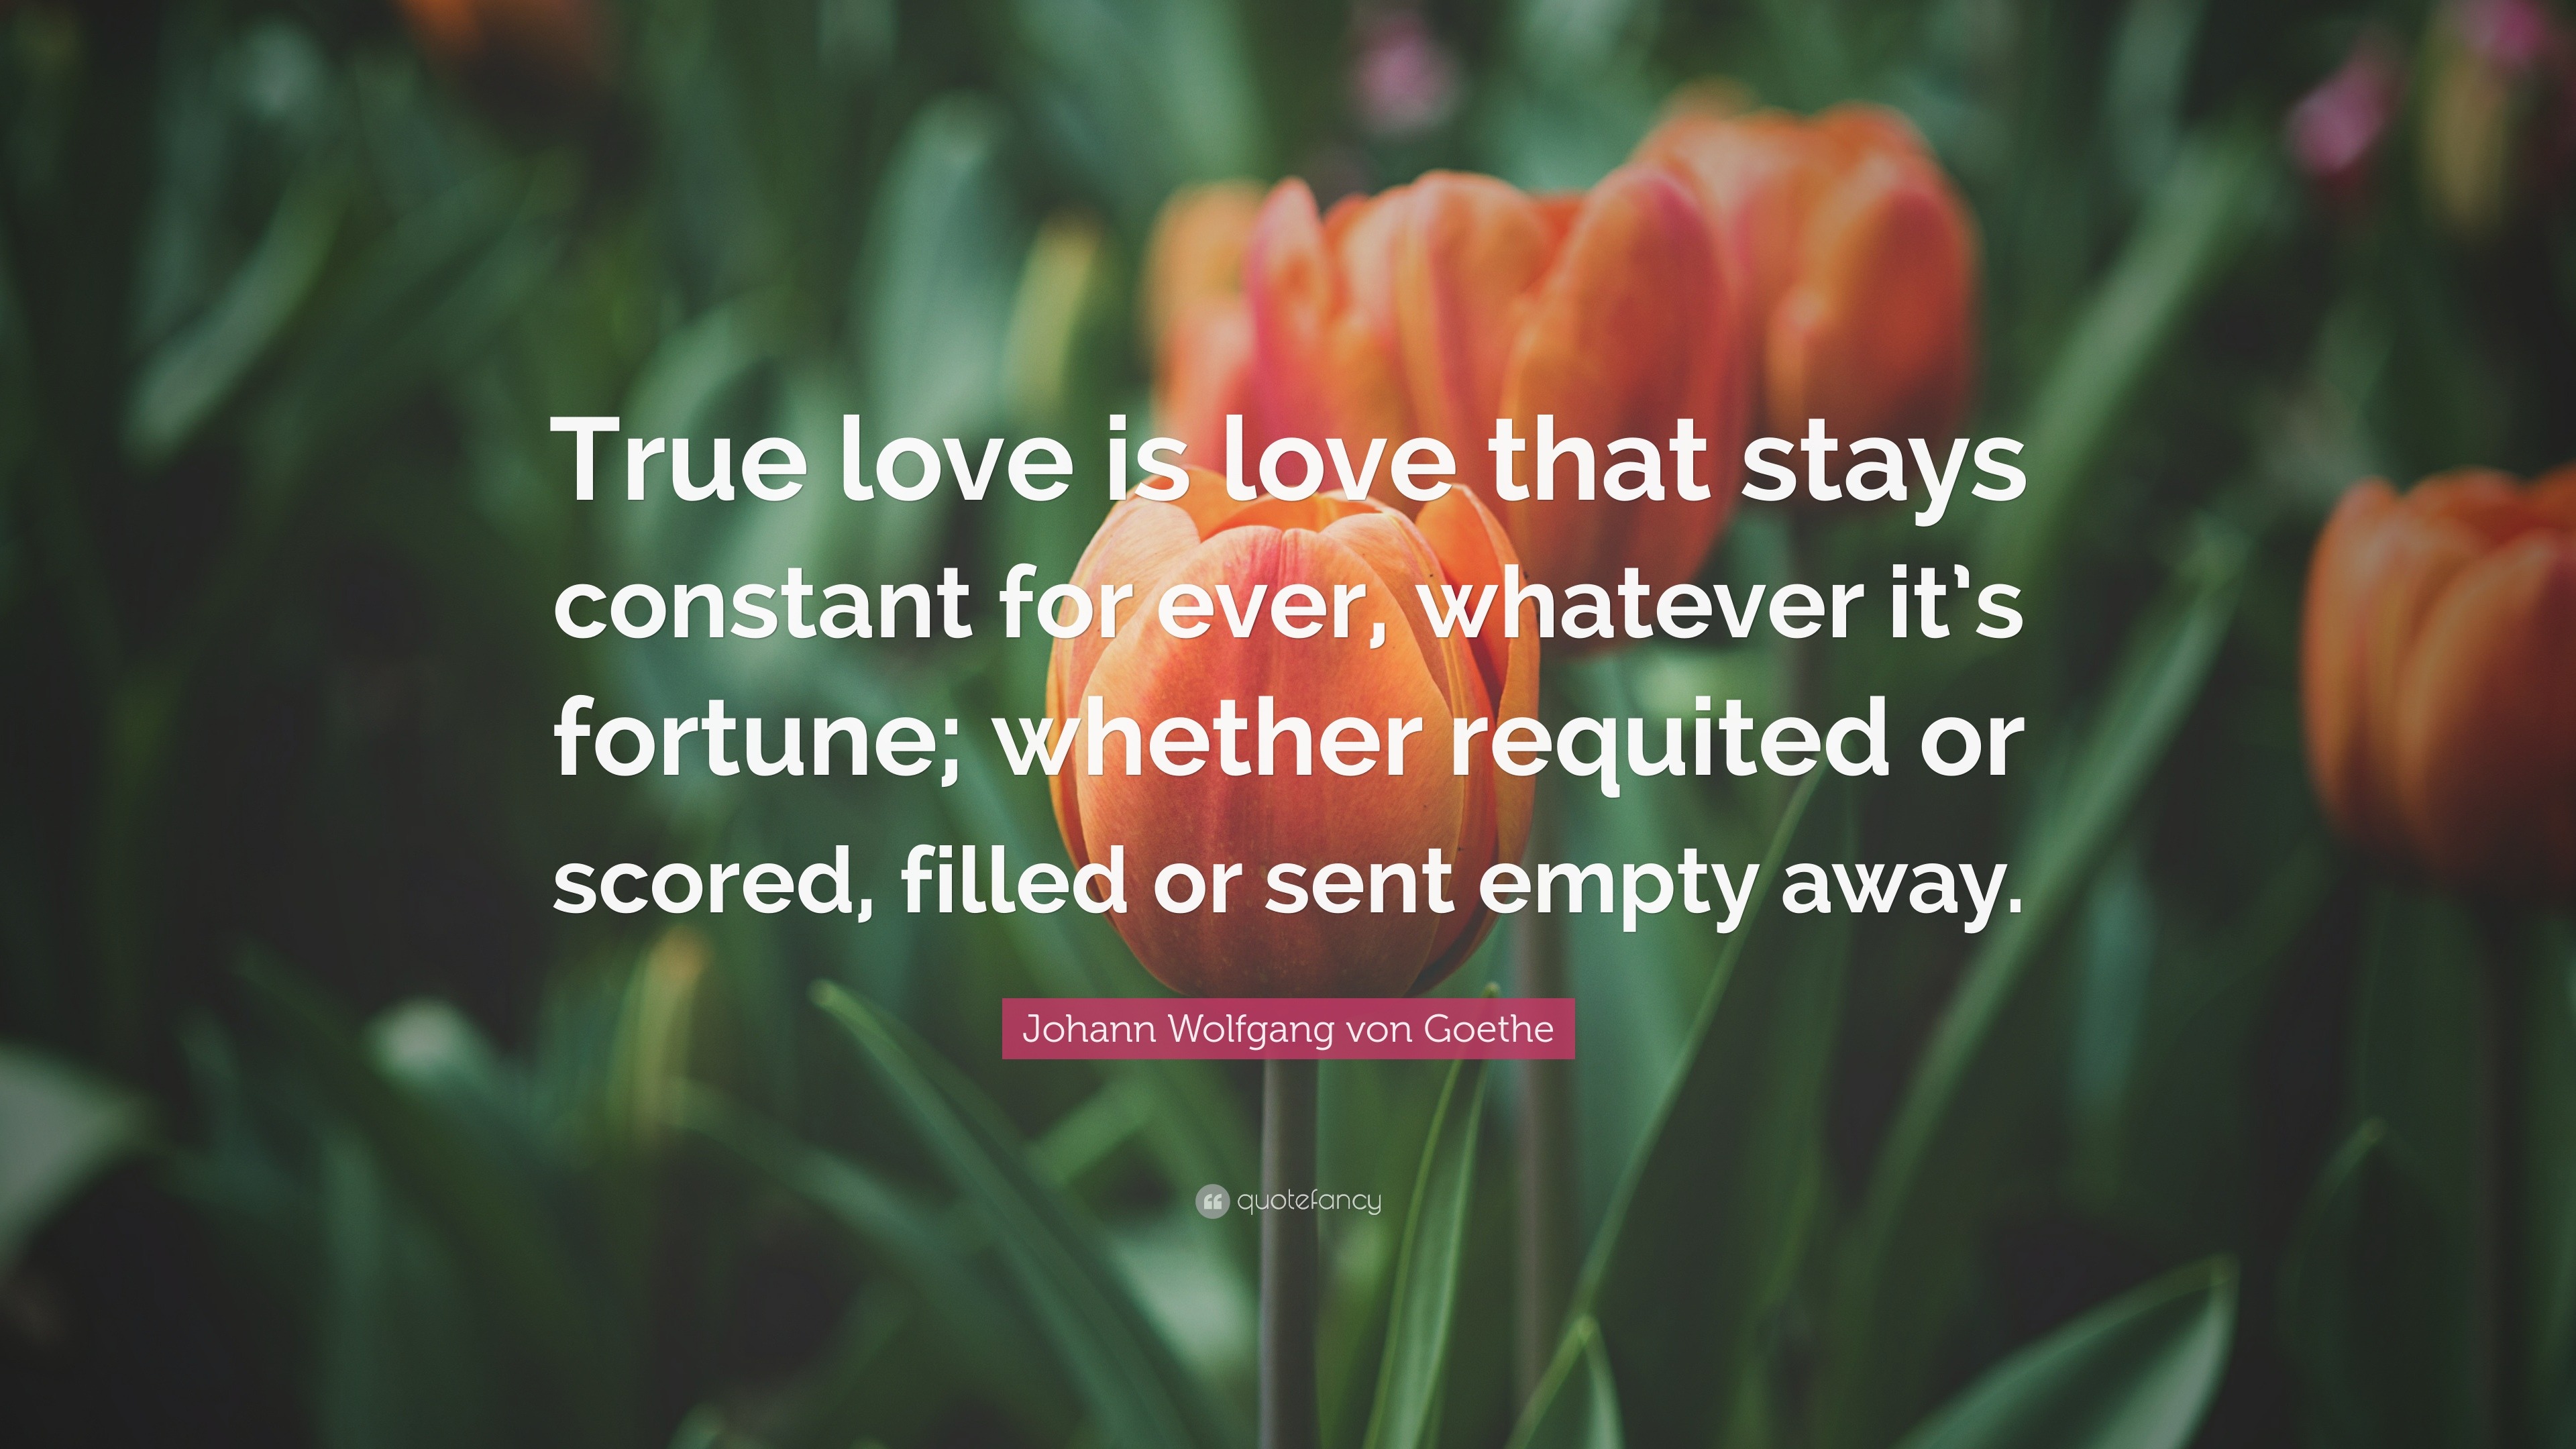 Johann Wolfgang von Goethe Quote: “True love is love that stays constant  for ever, whatever it's fortune; whether requited or scored, filled or sent  empty ”